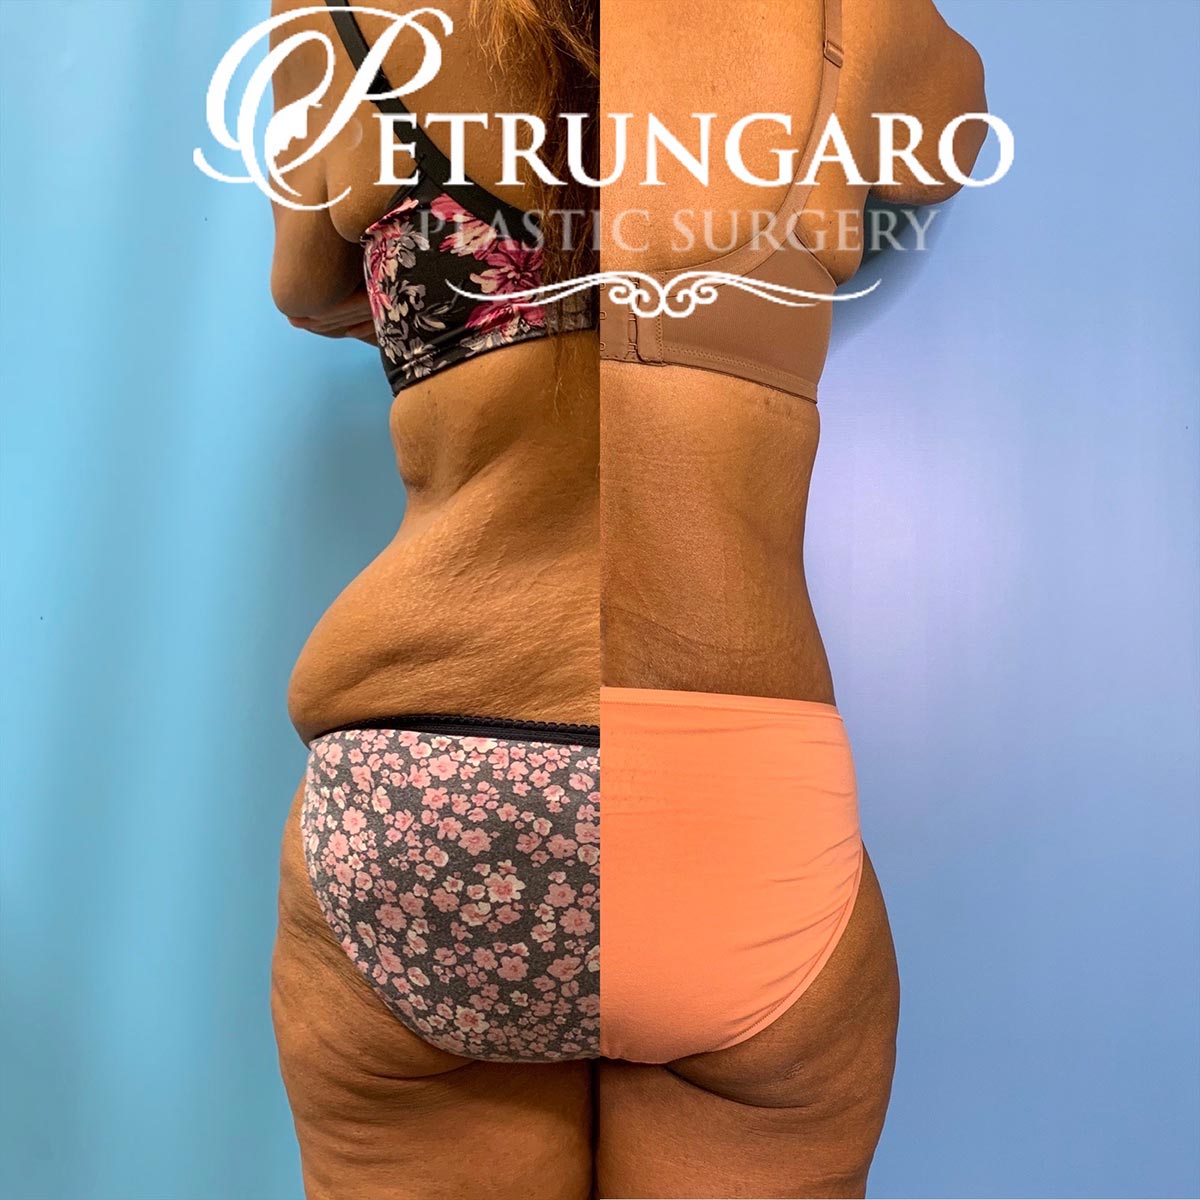 42 year old woman 3 months after a circumferential body lift-7